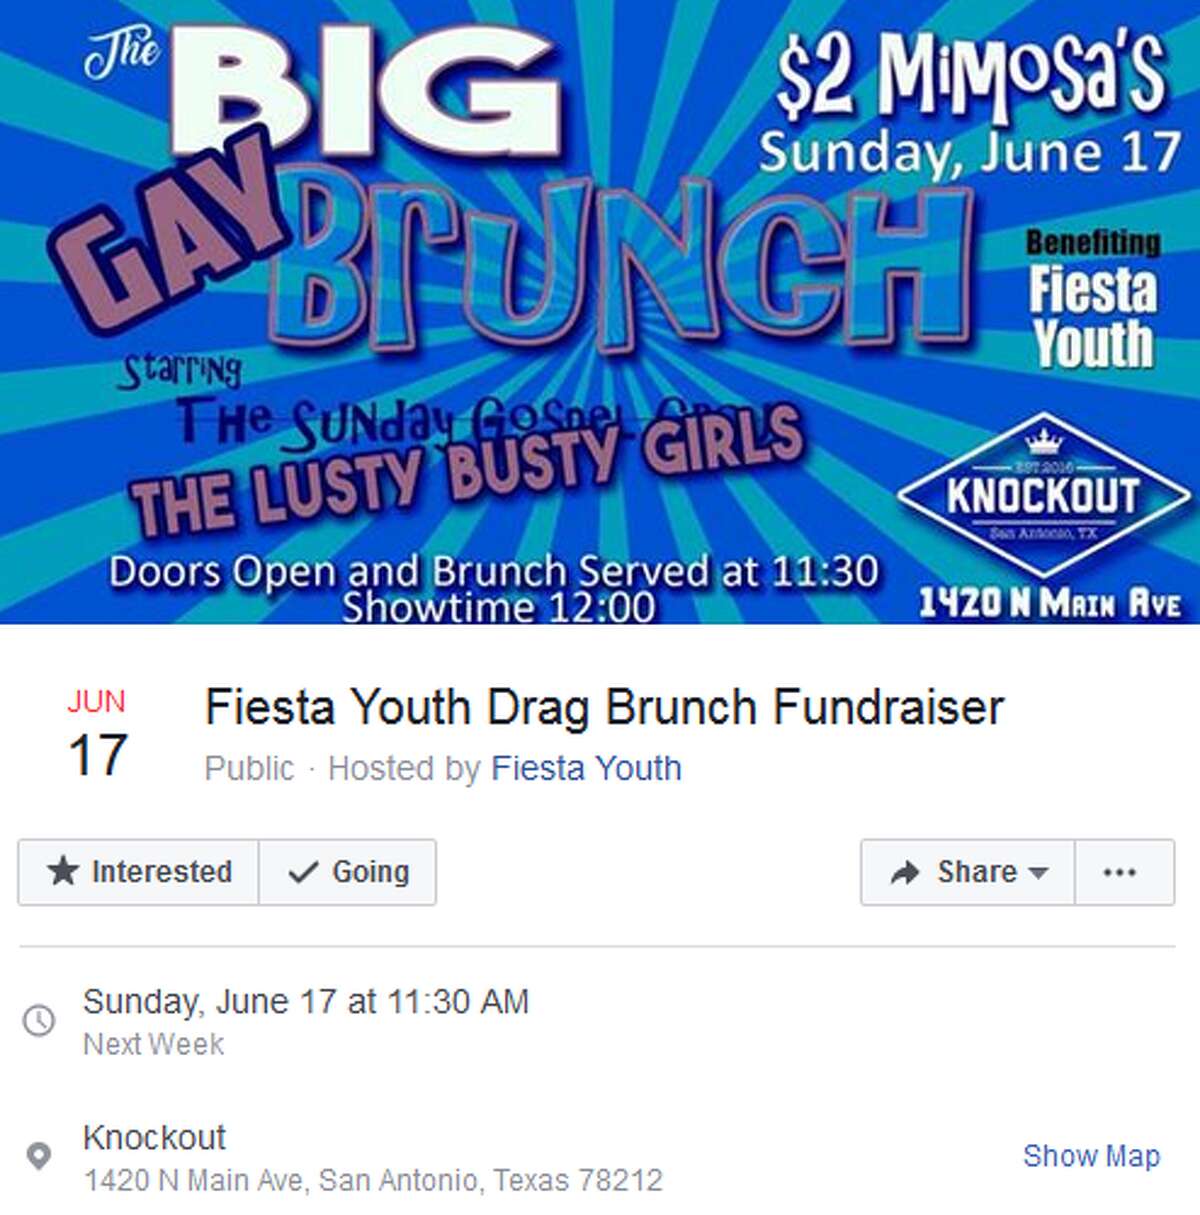 Fiesta Youth Drag Brunch Fundraiser Knockout - 1420 Main Ave. June 17, 11:30 a.m. The brunch in celebration of Pride Month offers an unlimited buffet and $2 mimosas to support Fiesta Youth.